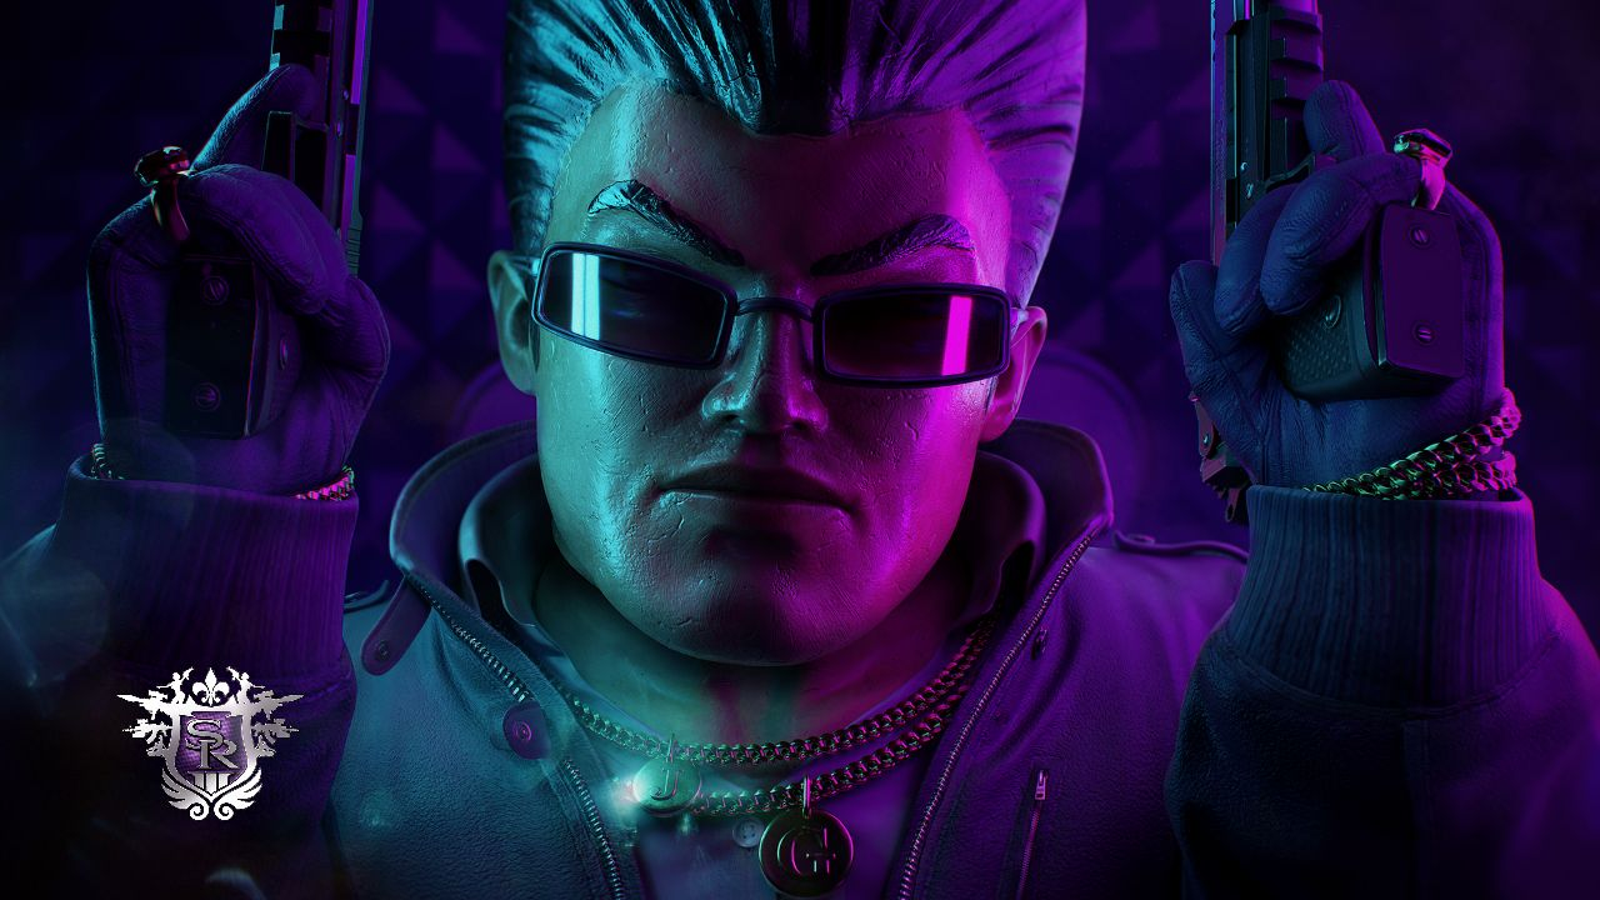 We're not kidding - the Saints Row The Third remaster is exceptional